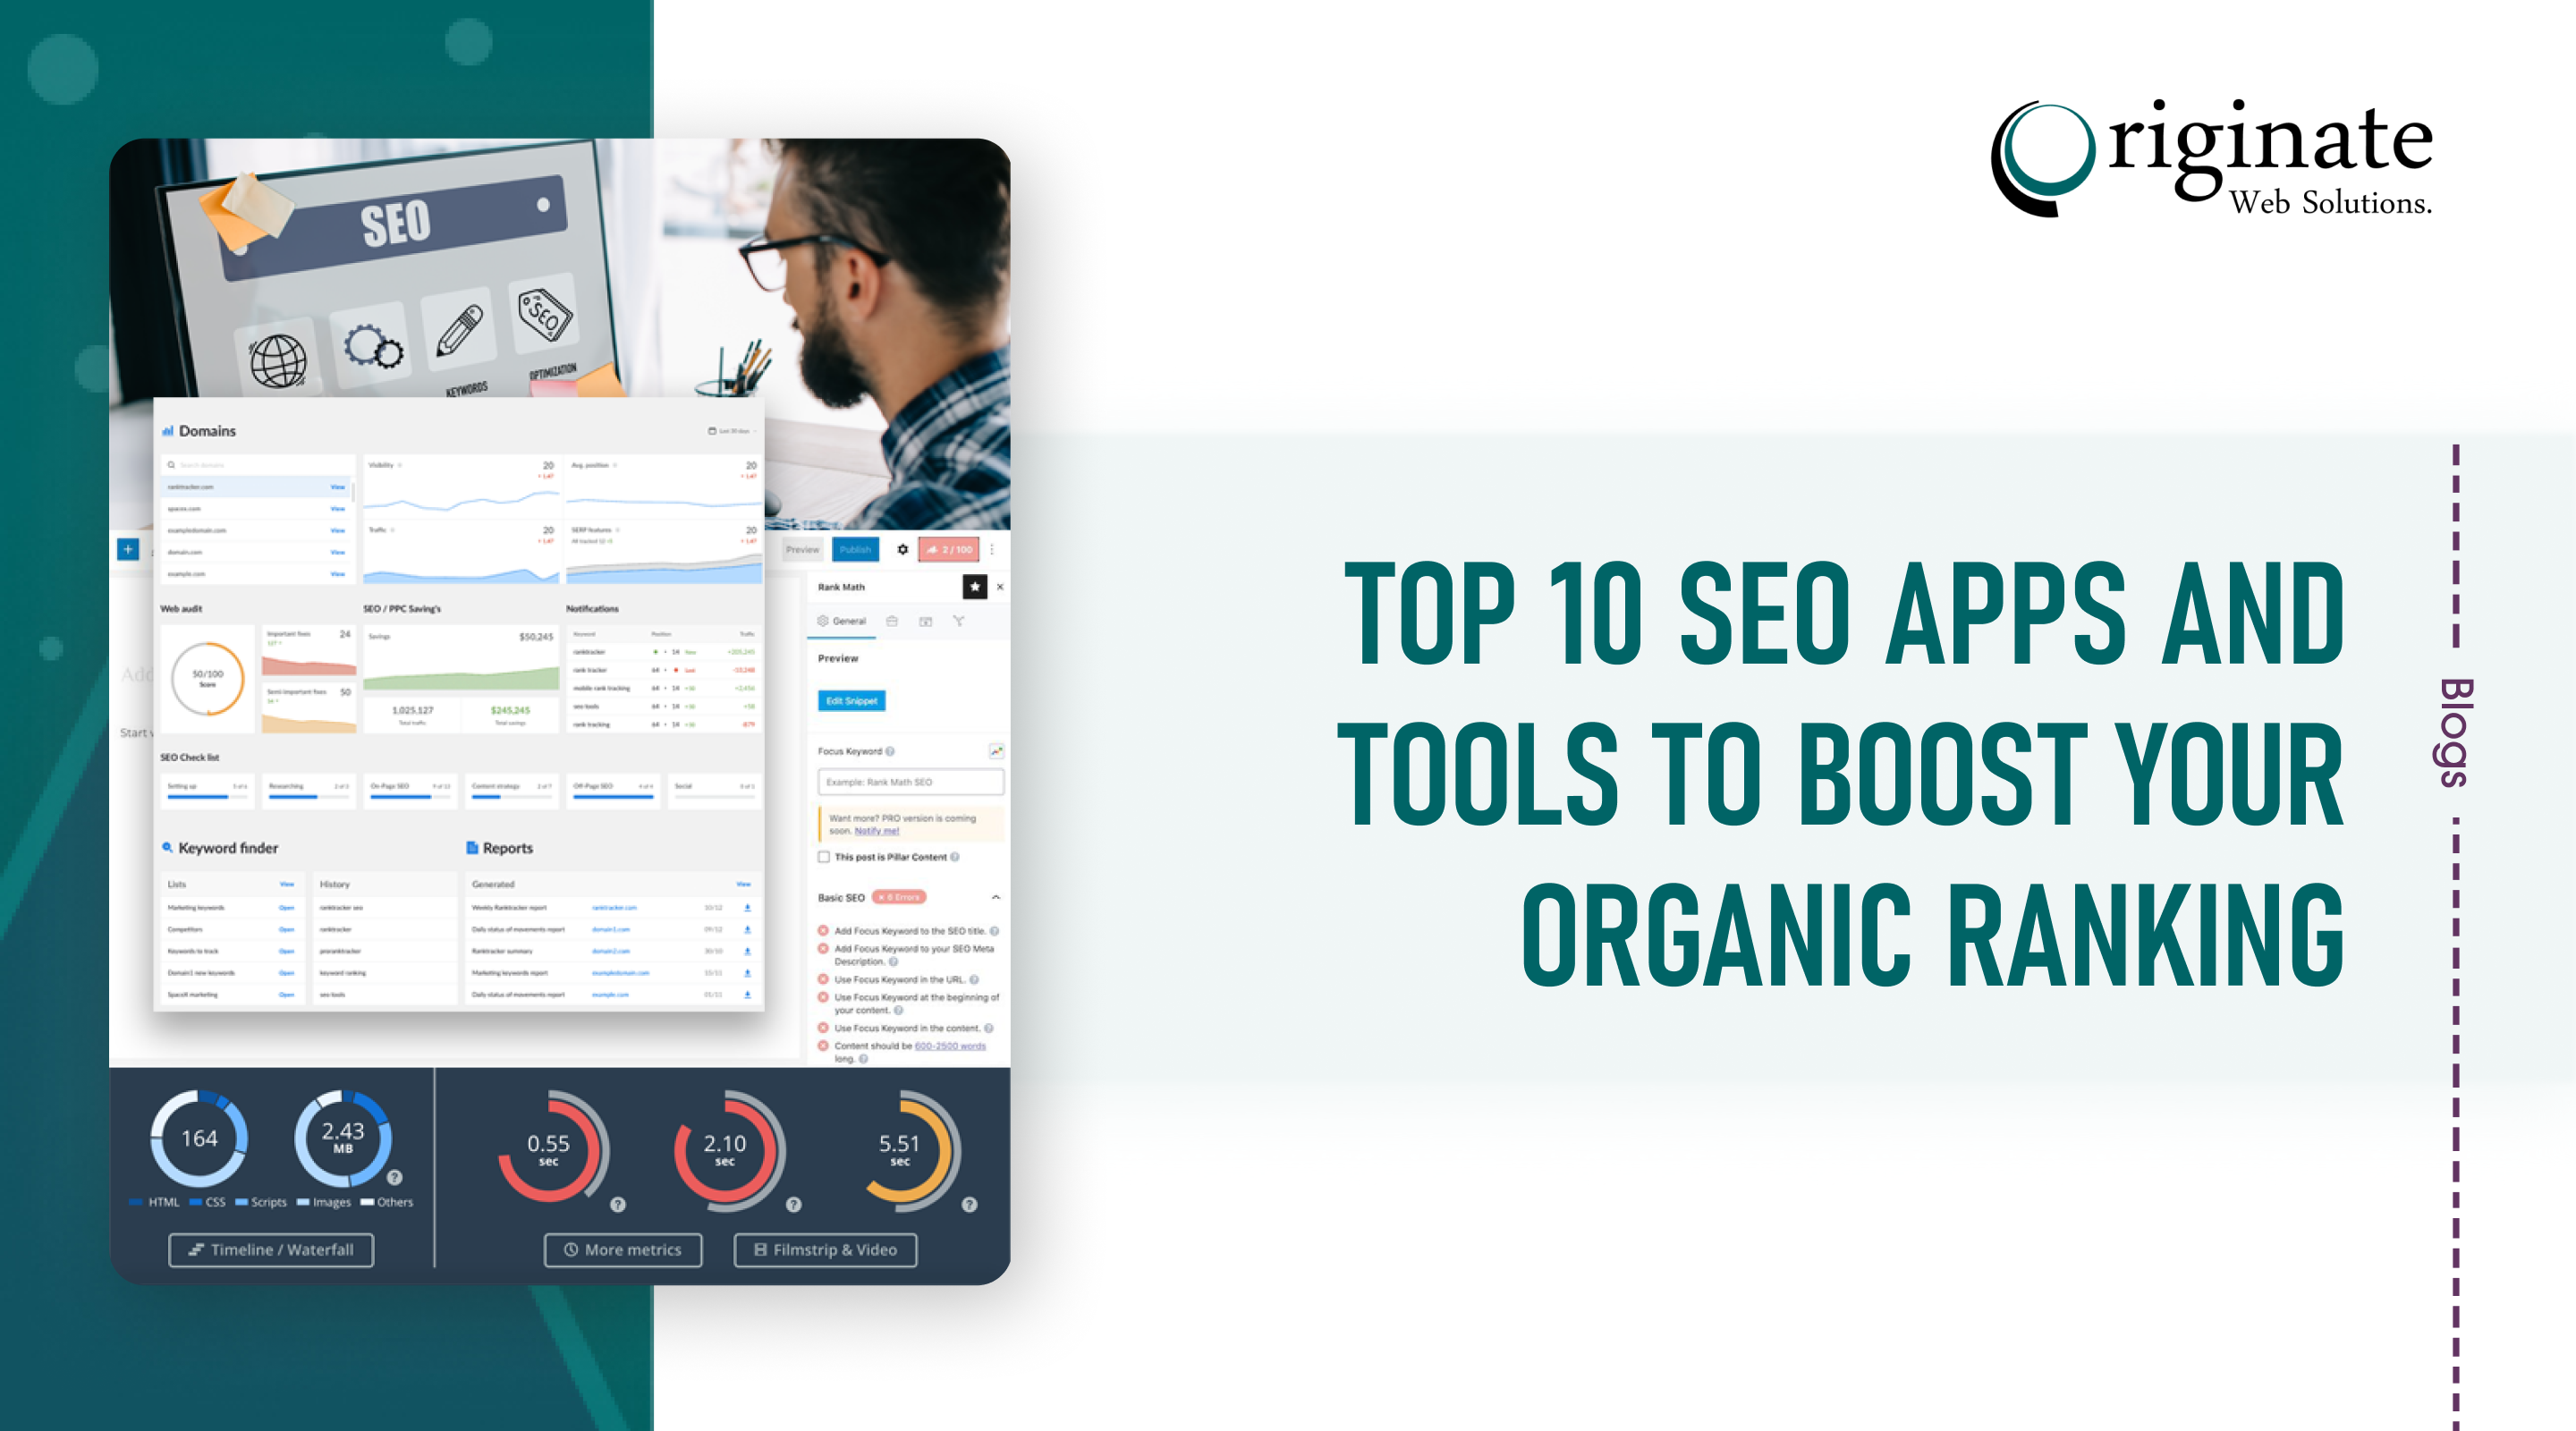 Top 10 SEO Apps and Tools to Boost your Organic Ranking